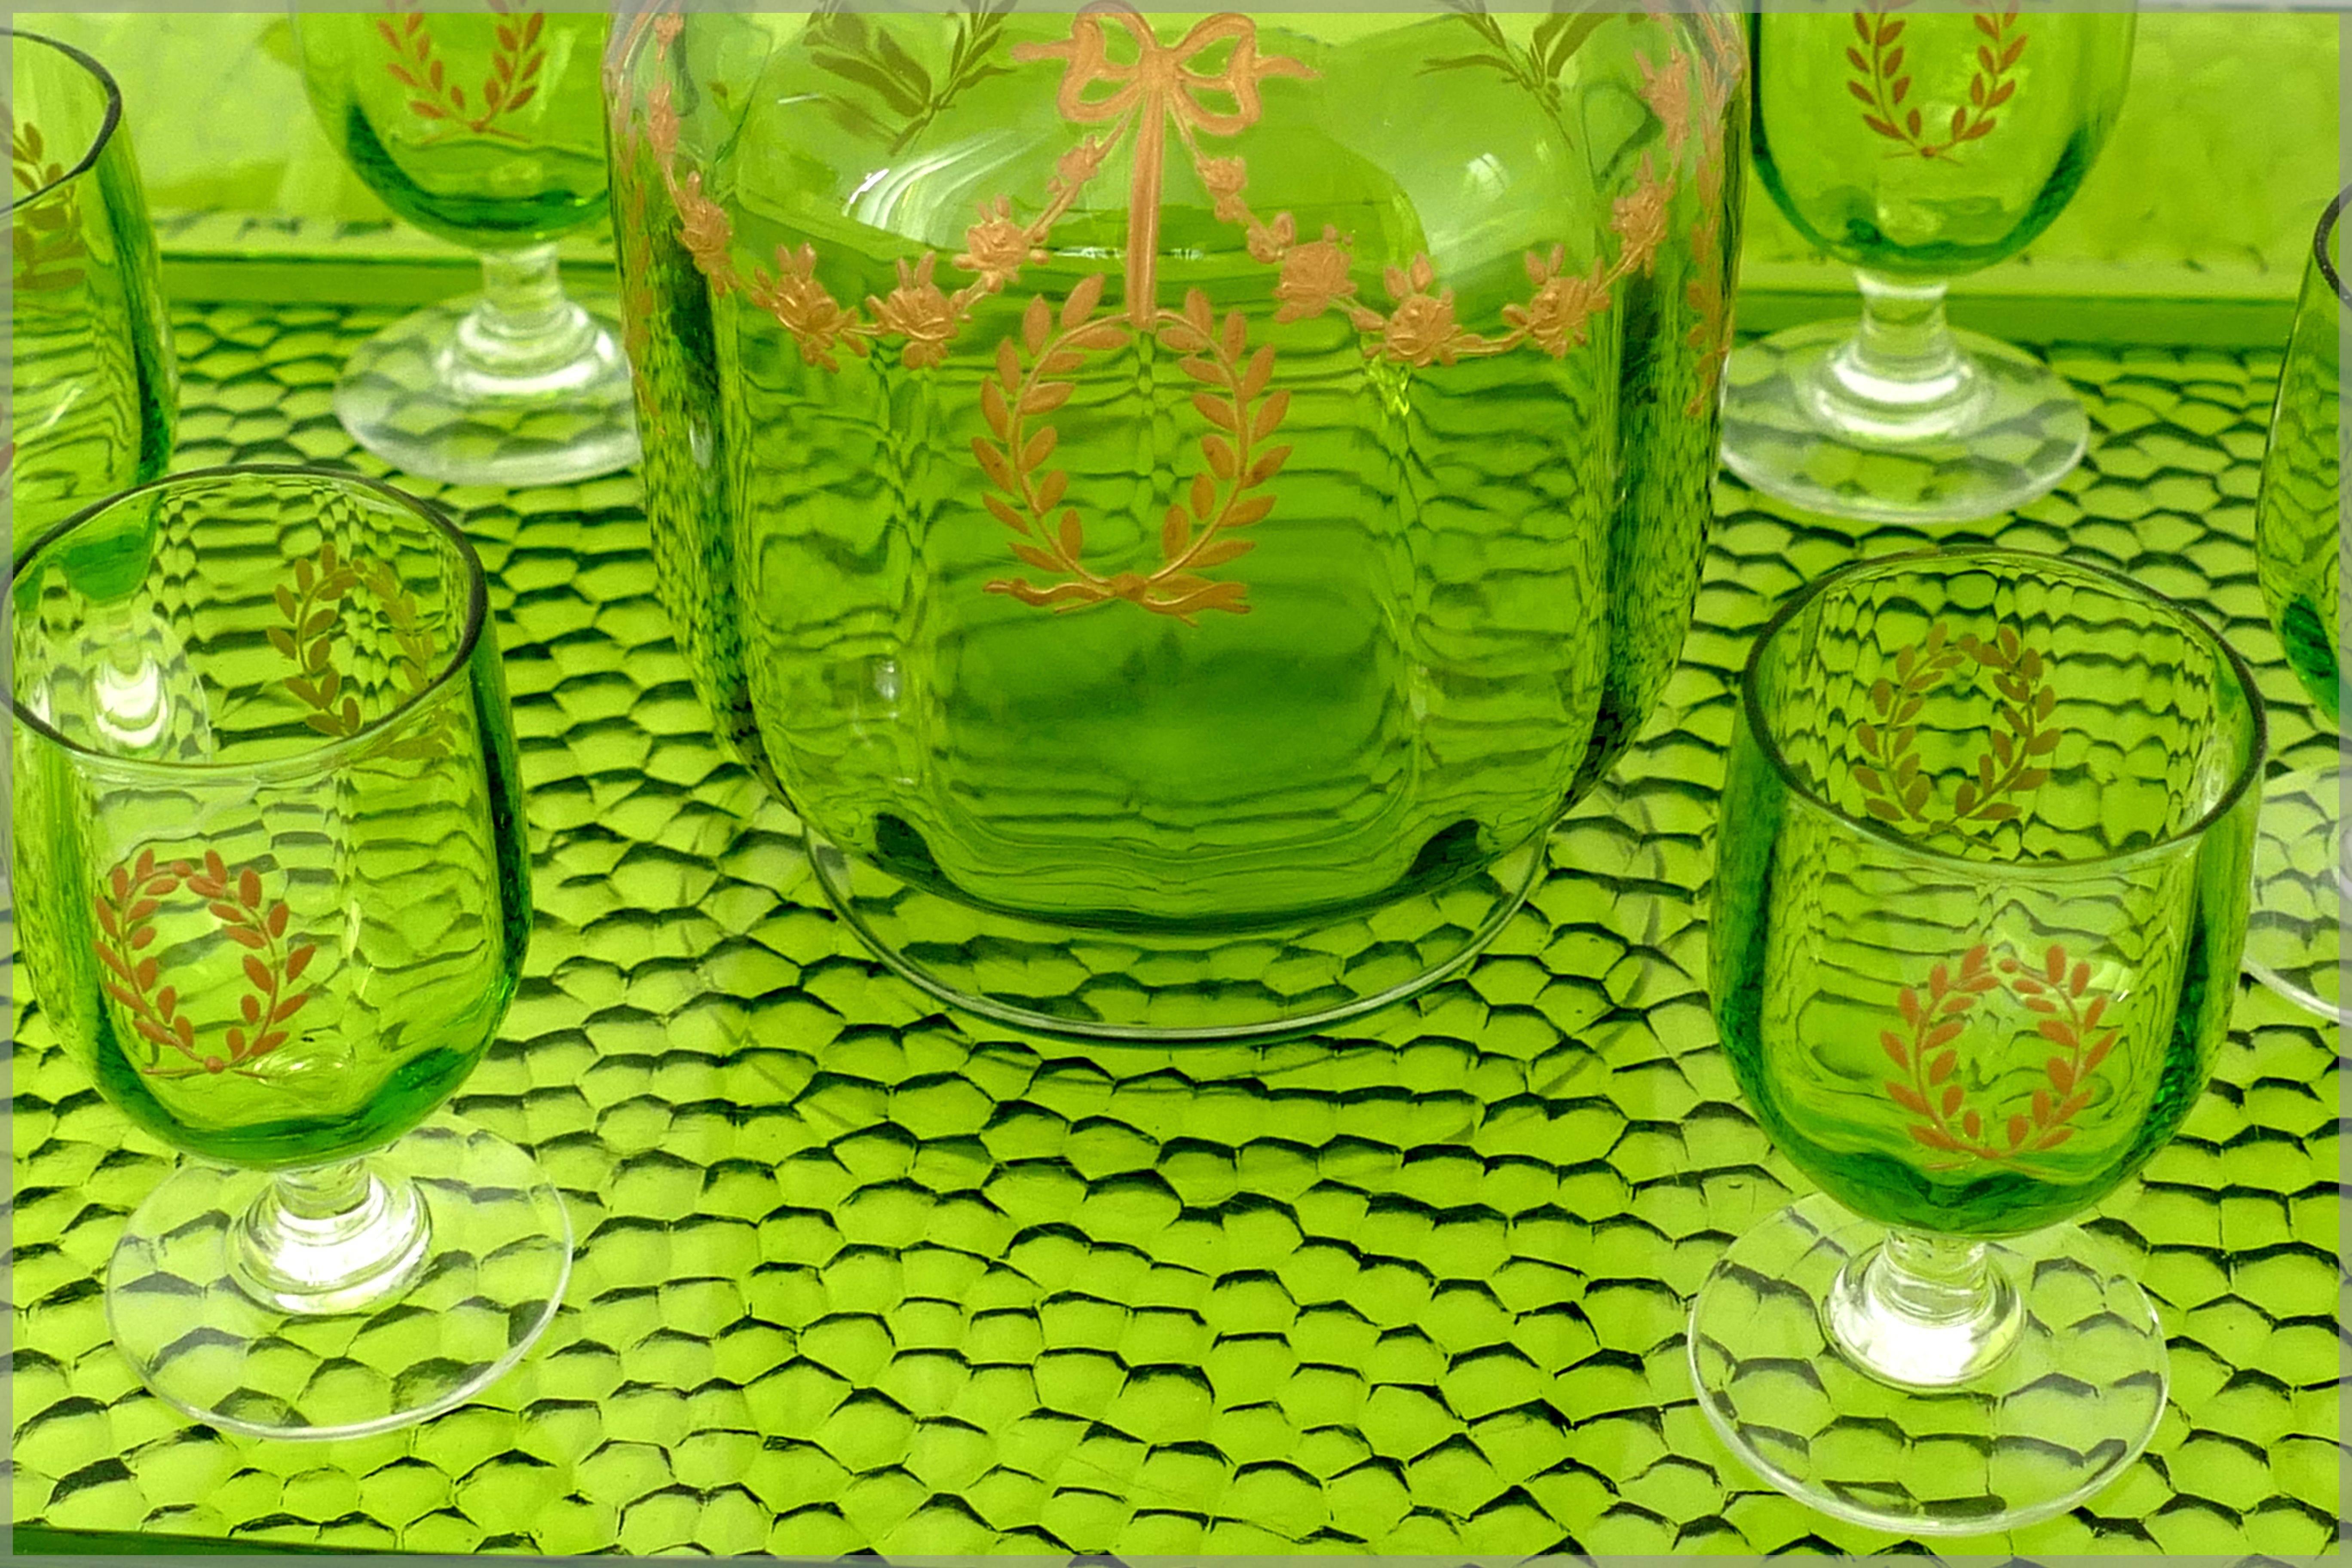 1900 rare Baccarat gold green chartreuse crystal liquor or aperitif service eight pieces.

Very rare service crystal Baccarat liqueur, green chartreuse in neoclassical style decor painted gold. This service consists of a decanter, six glasses and